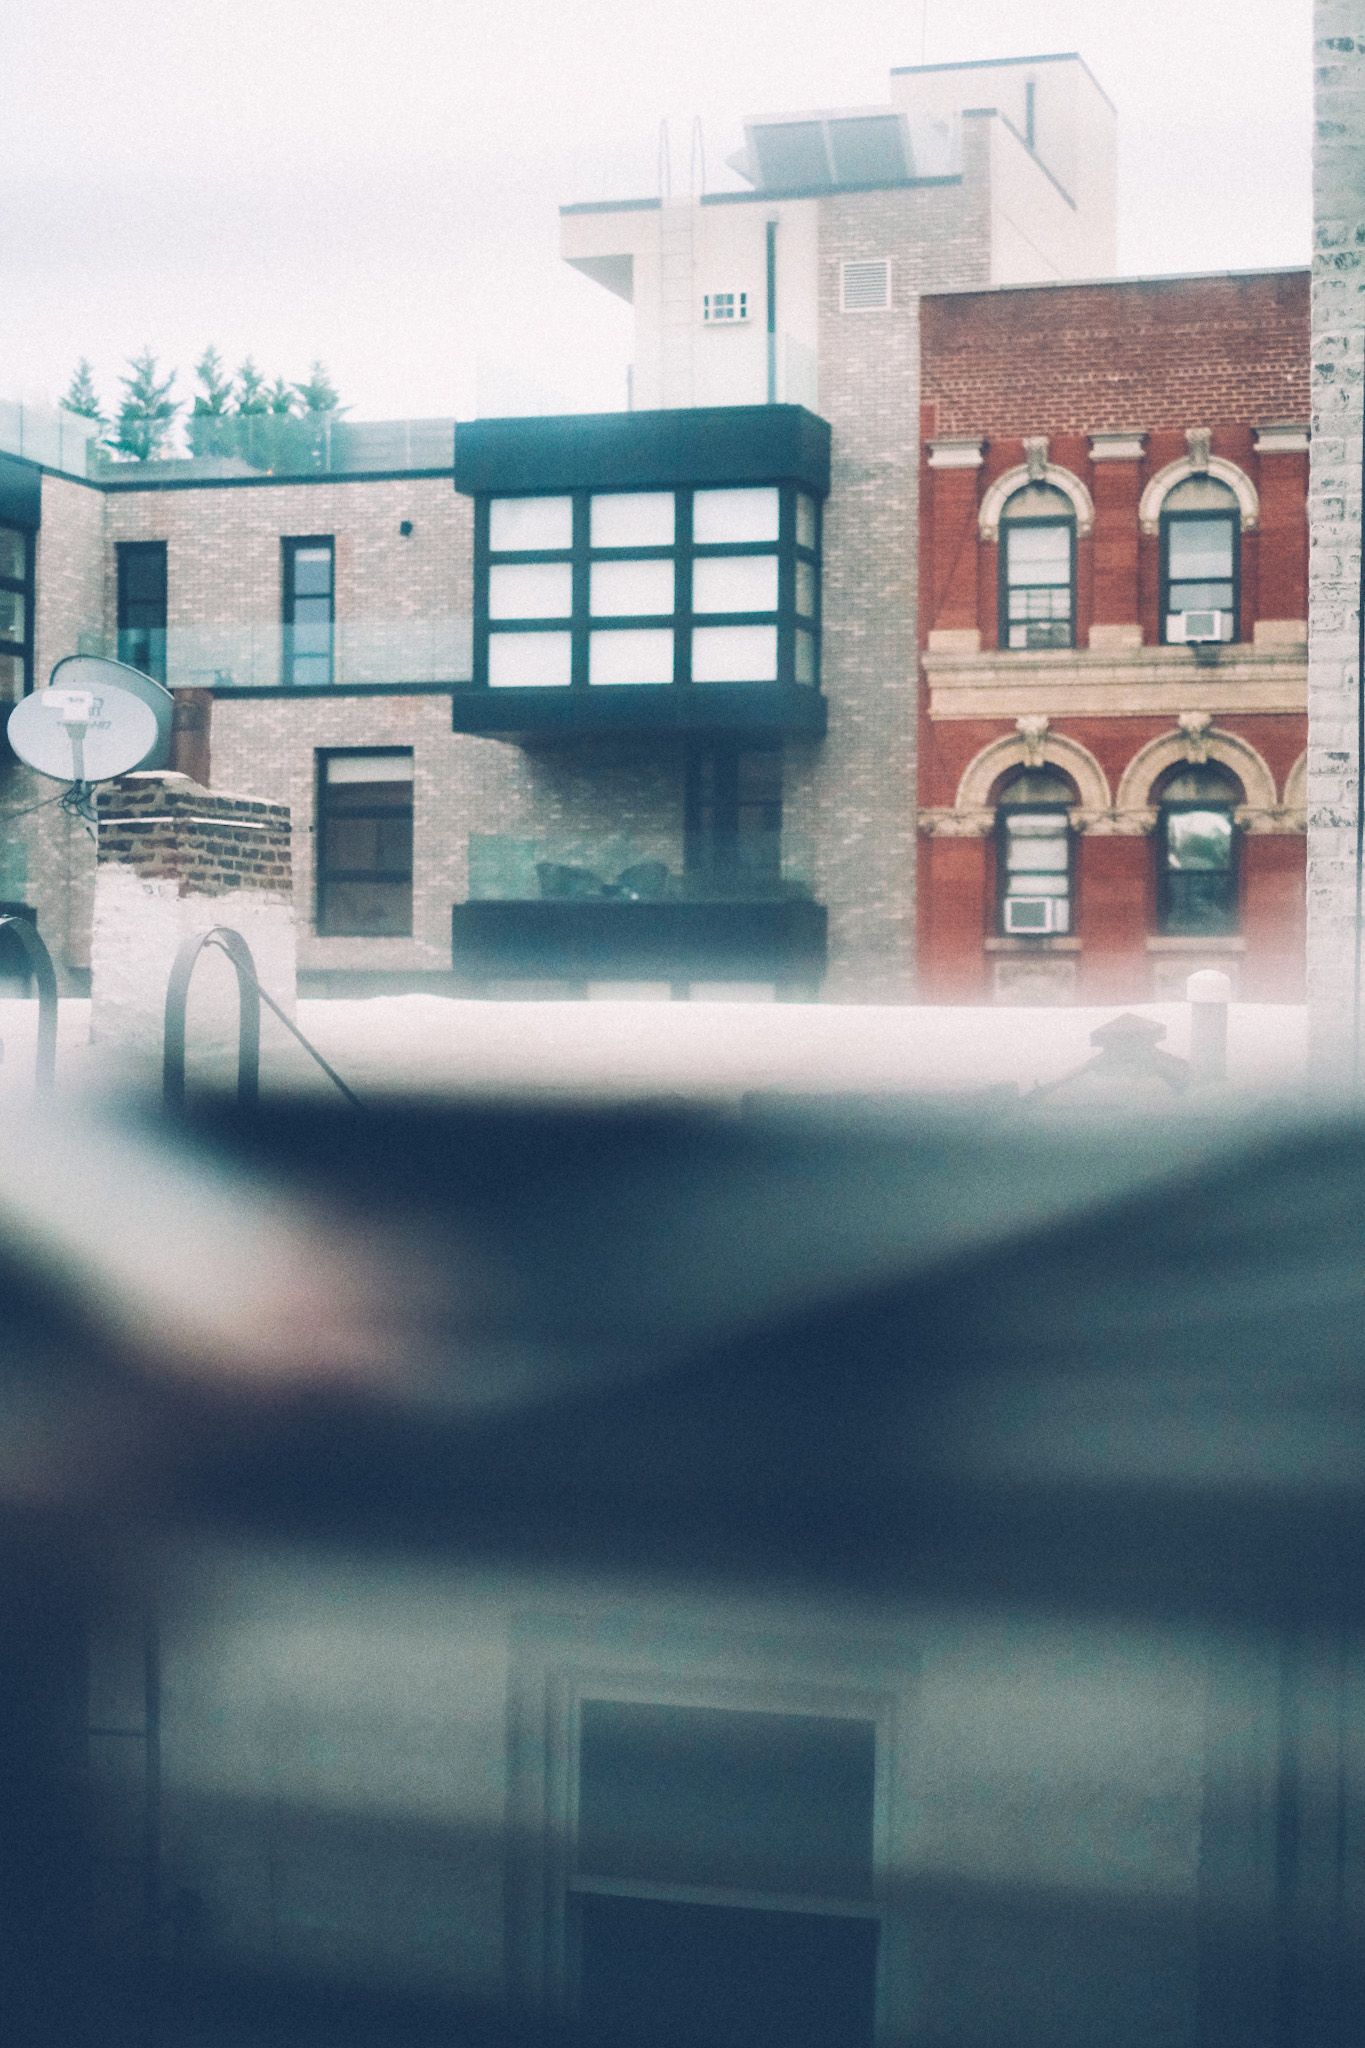 Red and white brick buildings are seen through a window, blind bent downward, on an overcast day.